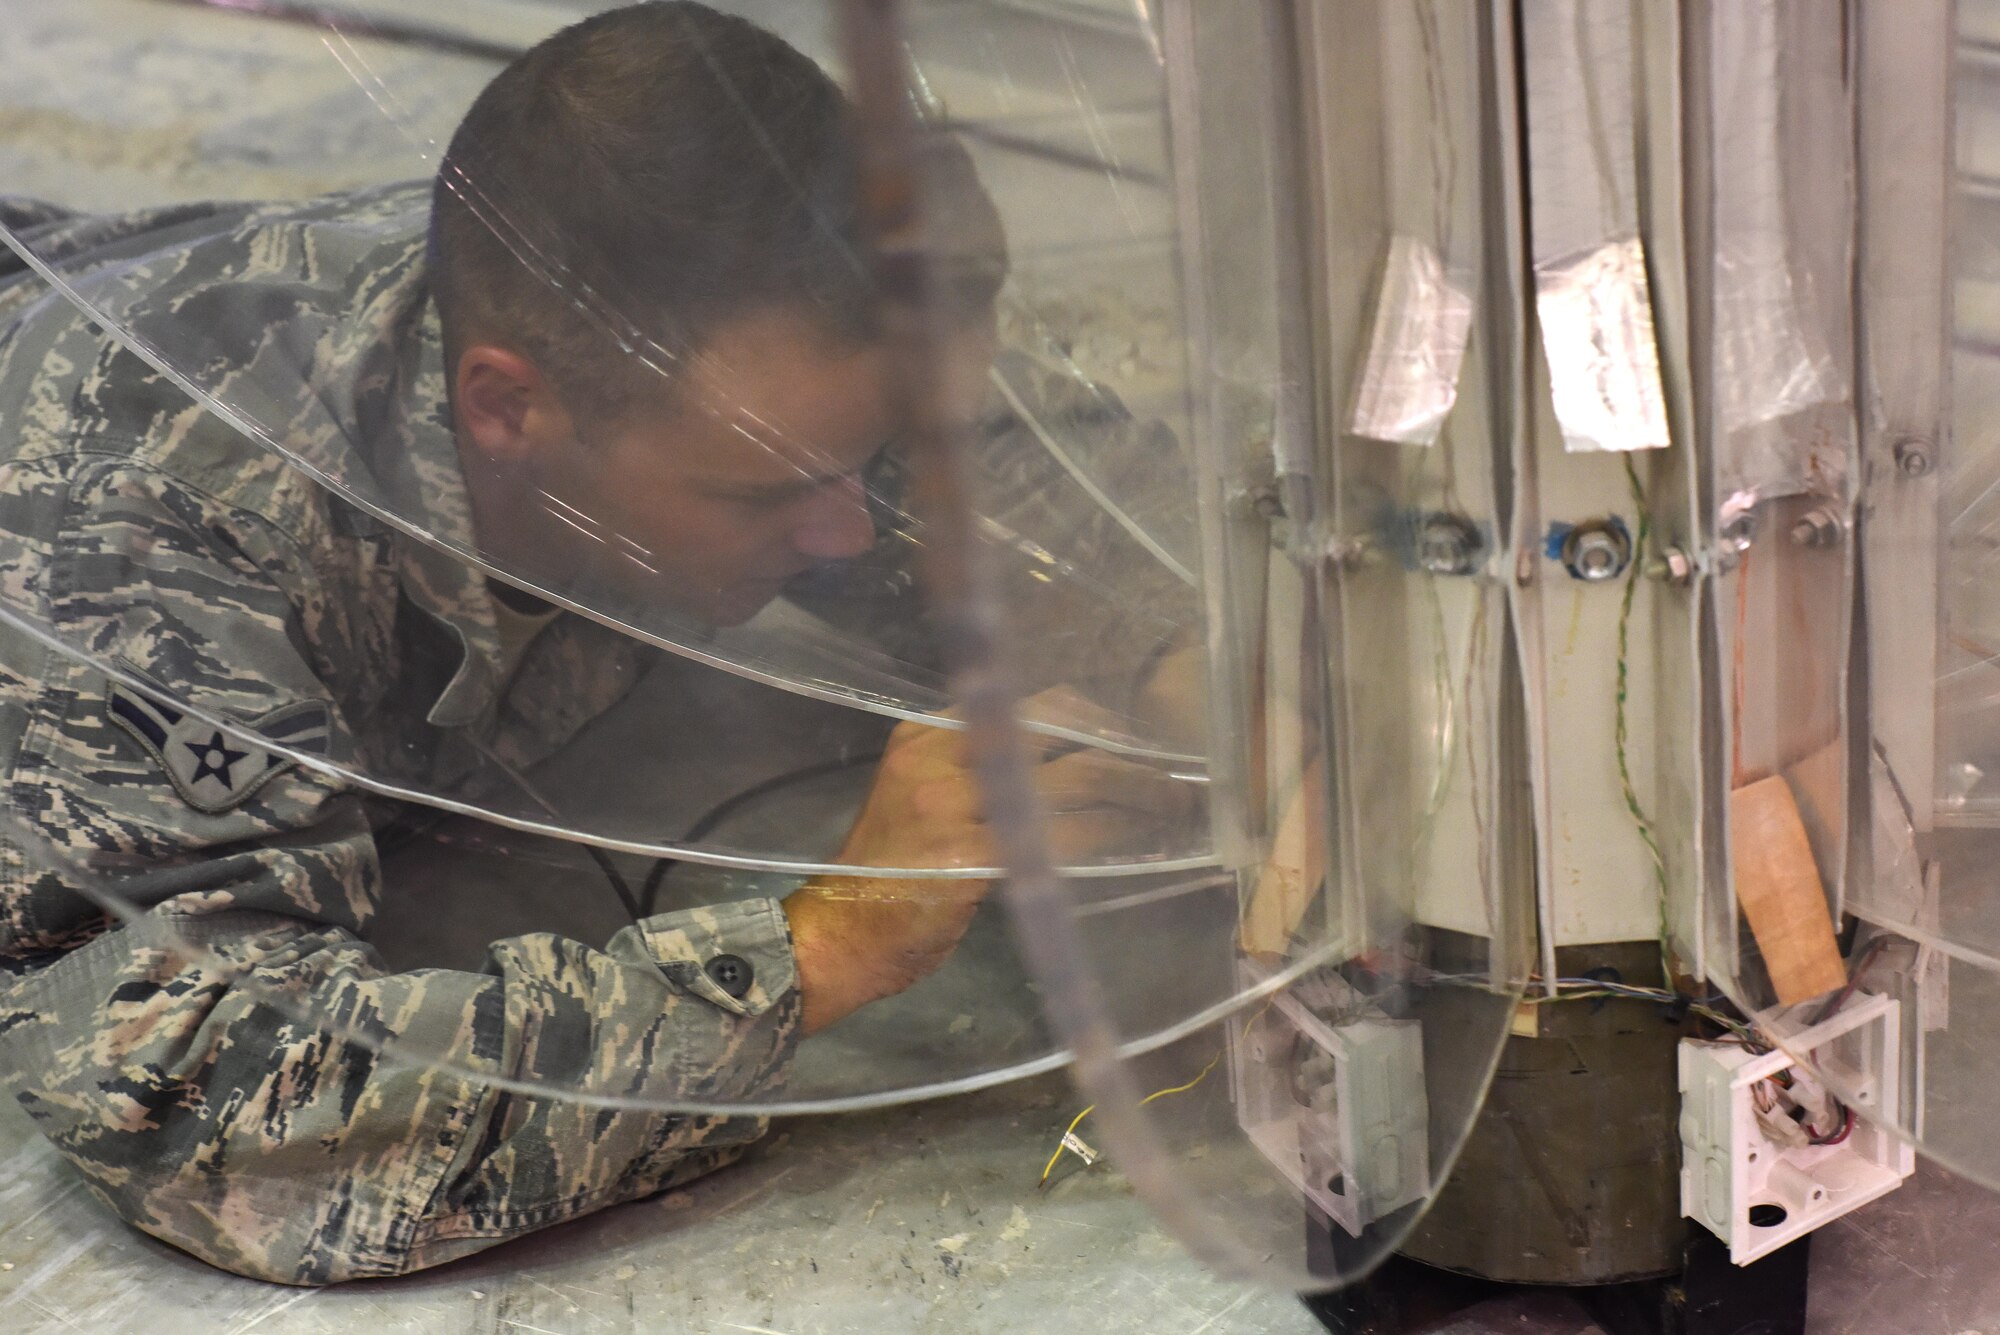 U.S. Air Force Airman 1st Class Bryce Armstrong, an electrical systems journeyman with the 379th Expeditionary Civil Engineer Squadron, works on a New Year’s Eve light up ball that he and Airmen from his unit repaired at Al Udeid Air Base, Qatar, Dec. 21, 2016. This ball will be lowered on New Year’s Eve in celebration of the new year. (U.S. Air Force photo by Senior Airman Cynthia A. Innocenti)